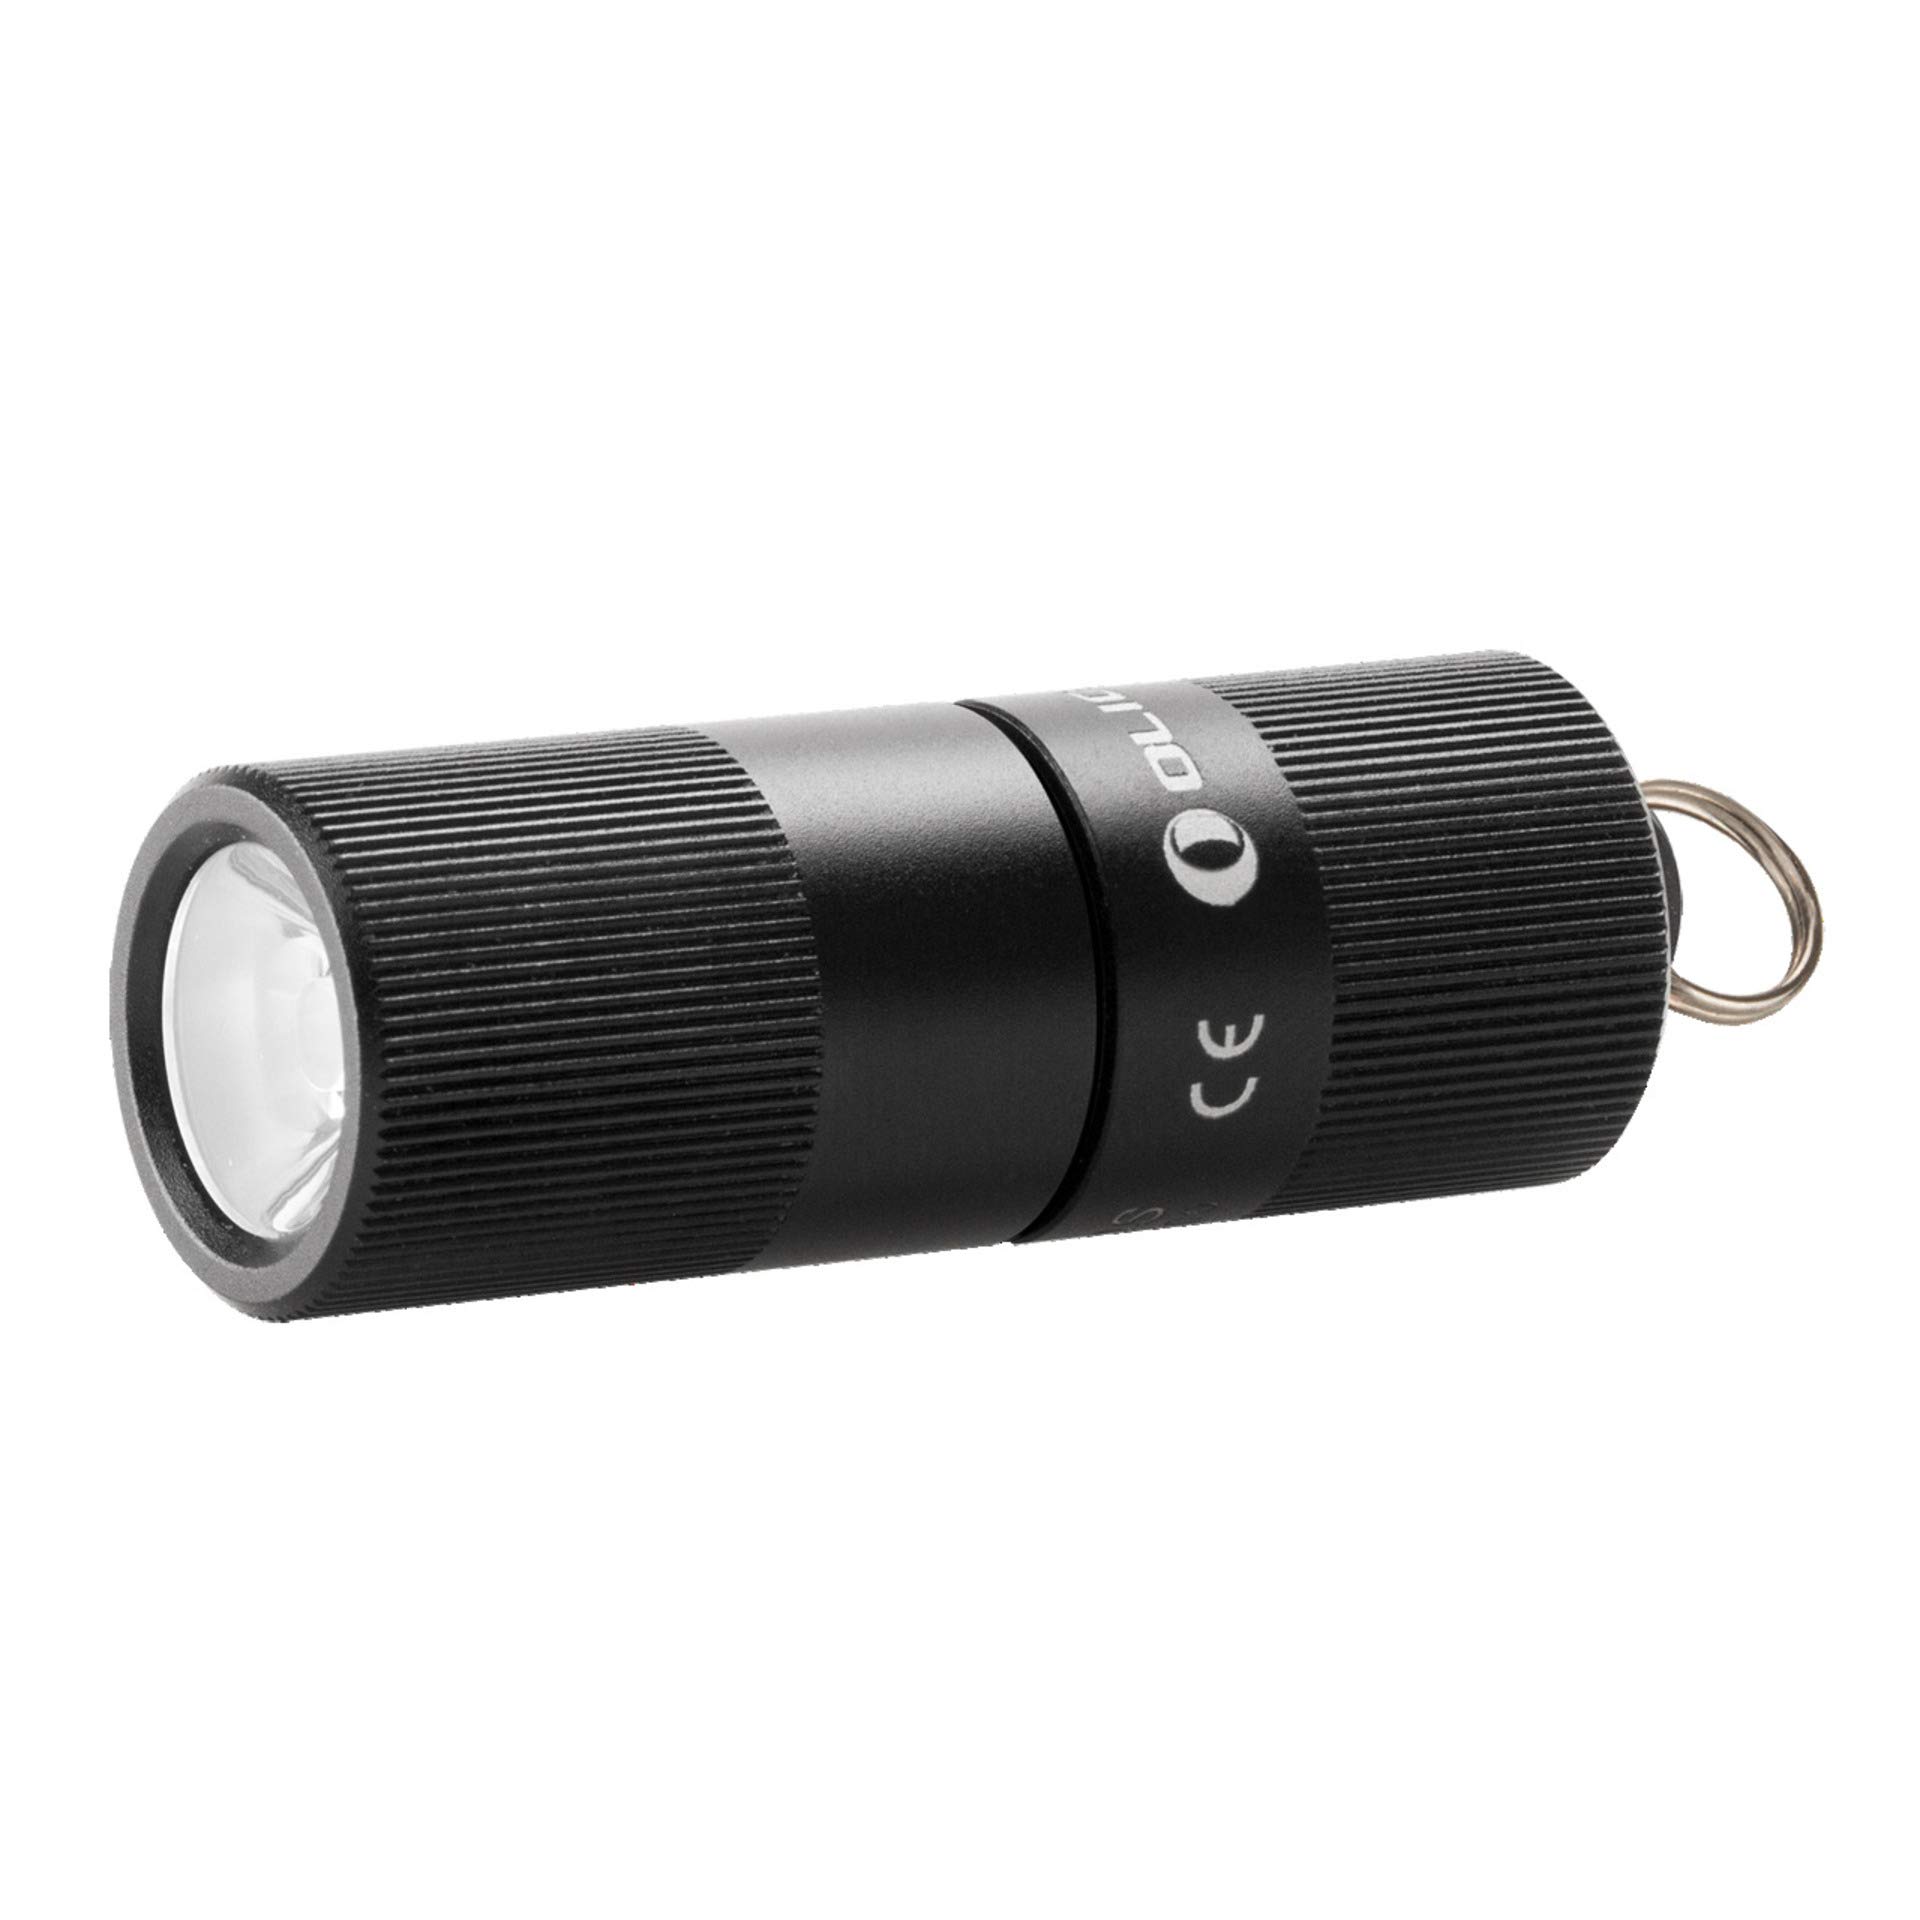 Book Cover Olight I1R EOS 130 Lumen Tiny Rechargeable LED Keychain Light with Built-in battery and USB cable